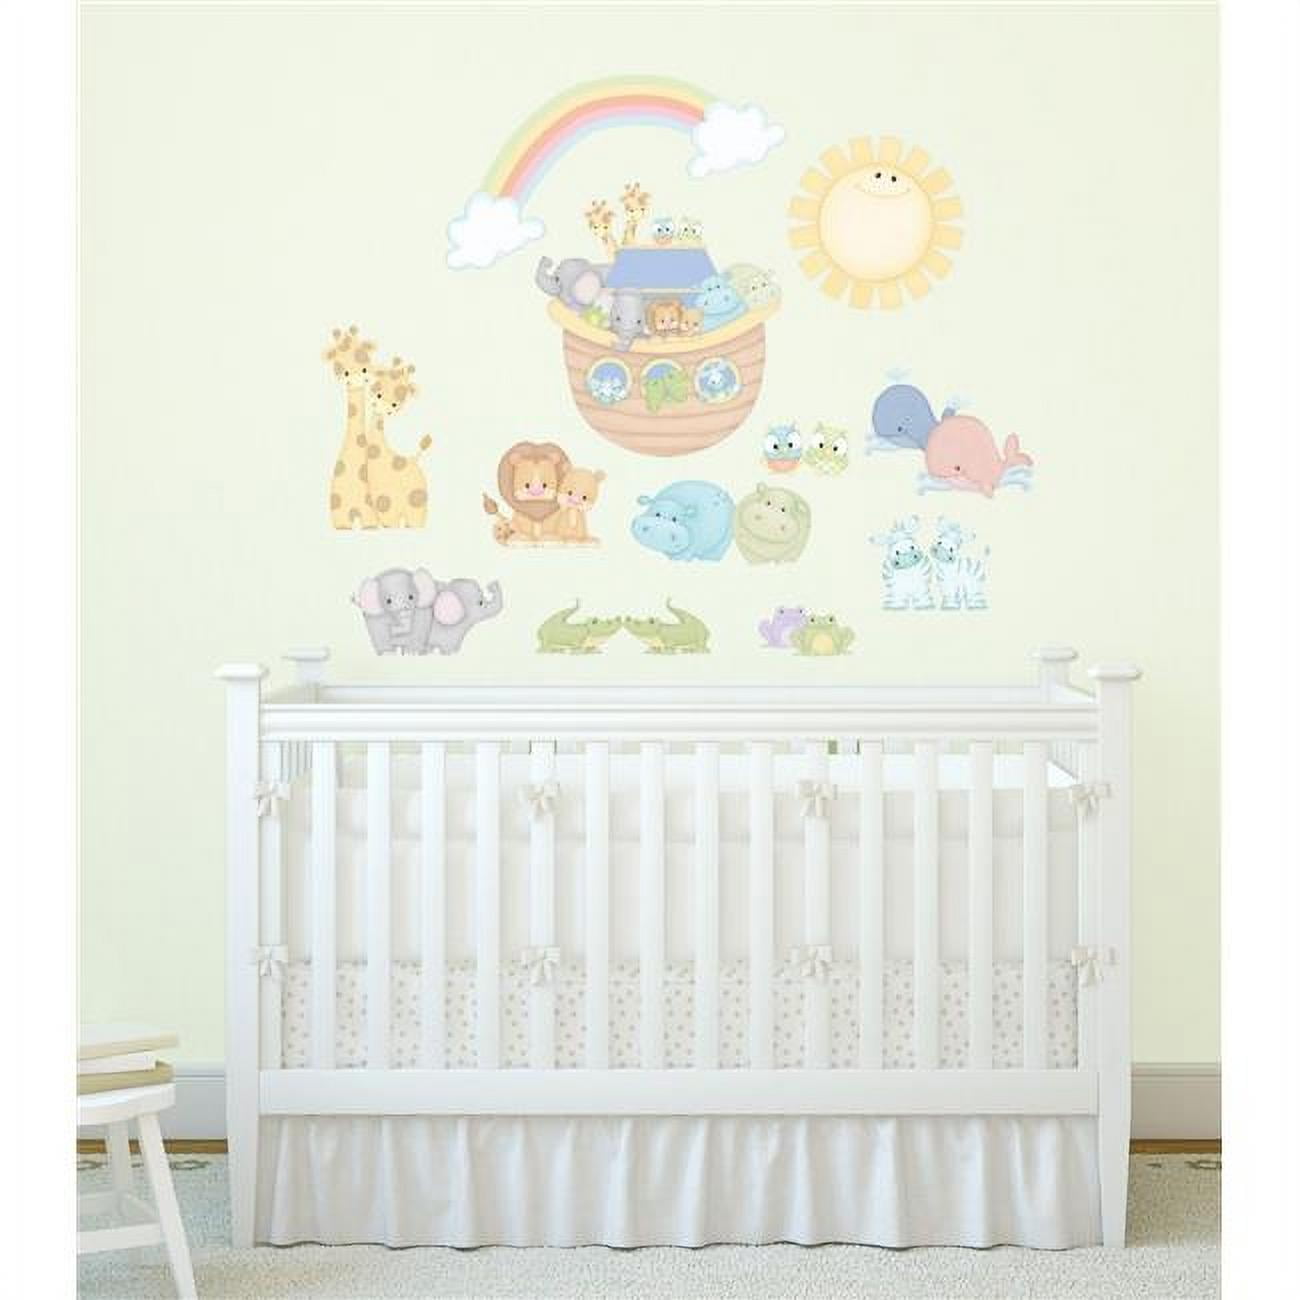 Picture of Borders Unlimited 10024 Noahs Pastel Pairs Applique Wall Decal Stickers, Blue - Super Jumbo